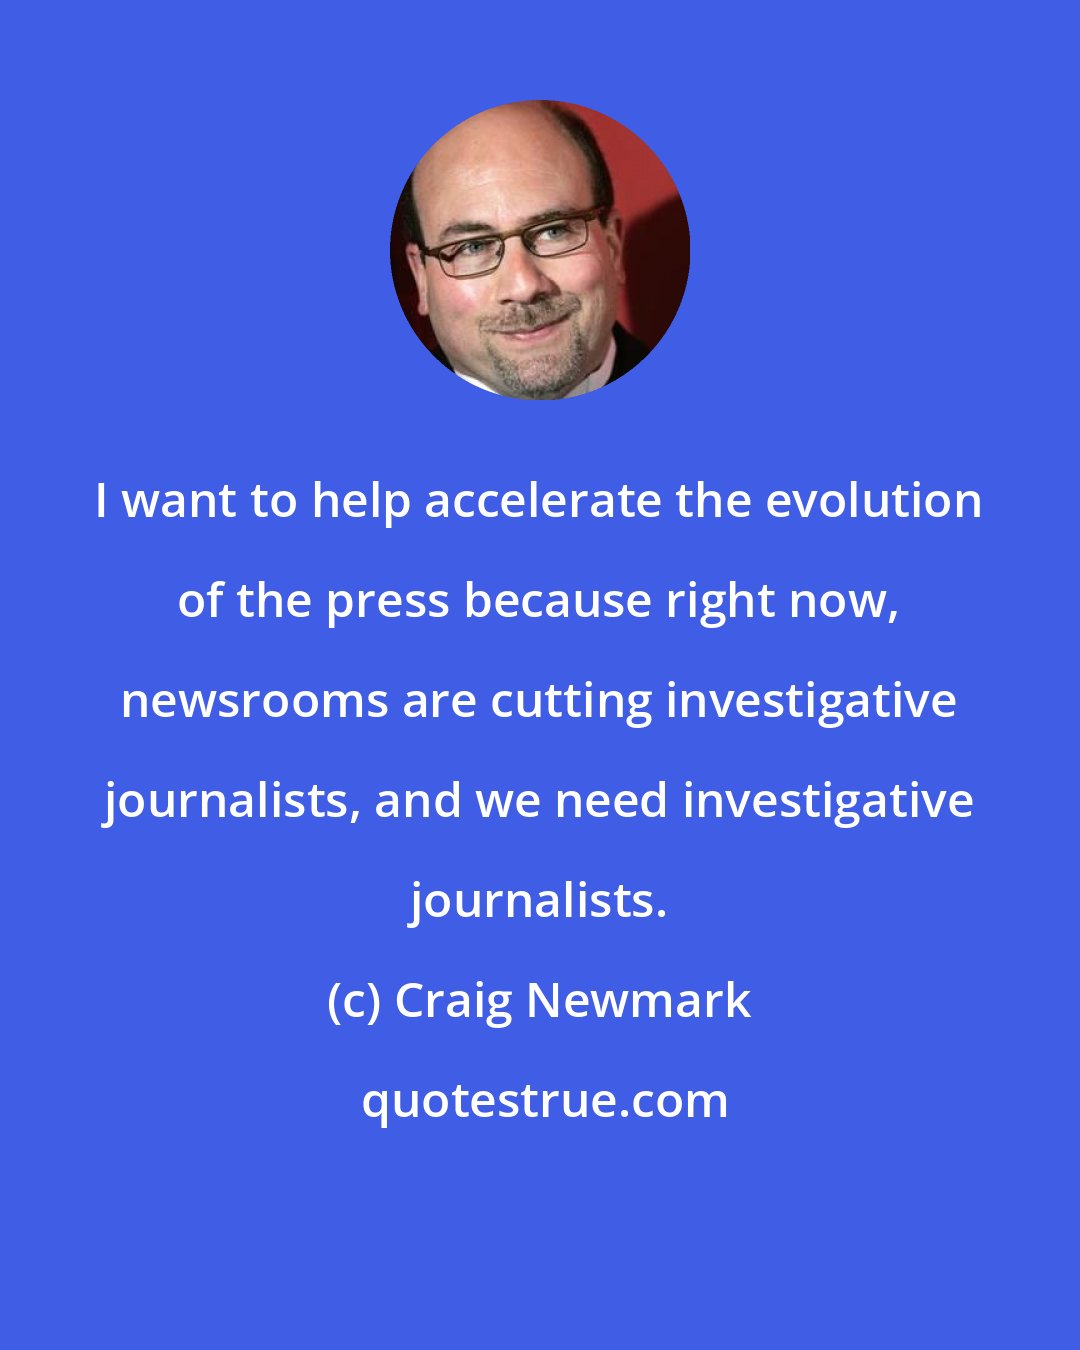 Craig Newmark: I want to help accelerate the evolution of the press because right now, newsrooms are cutting investigative journalists, and we need investigative journalists.